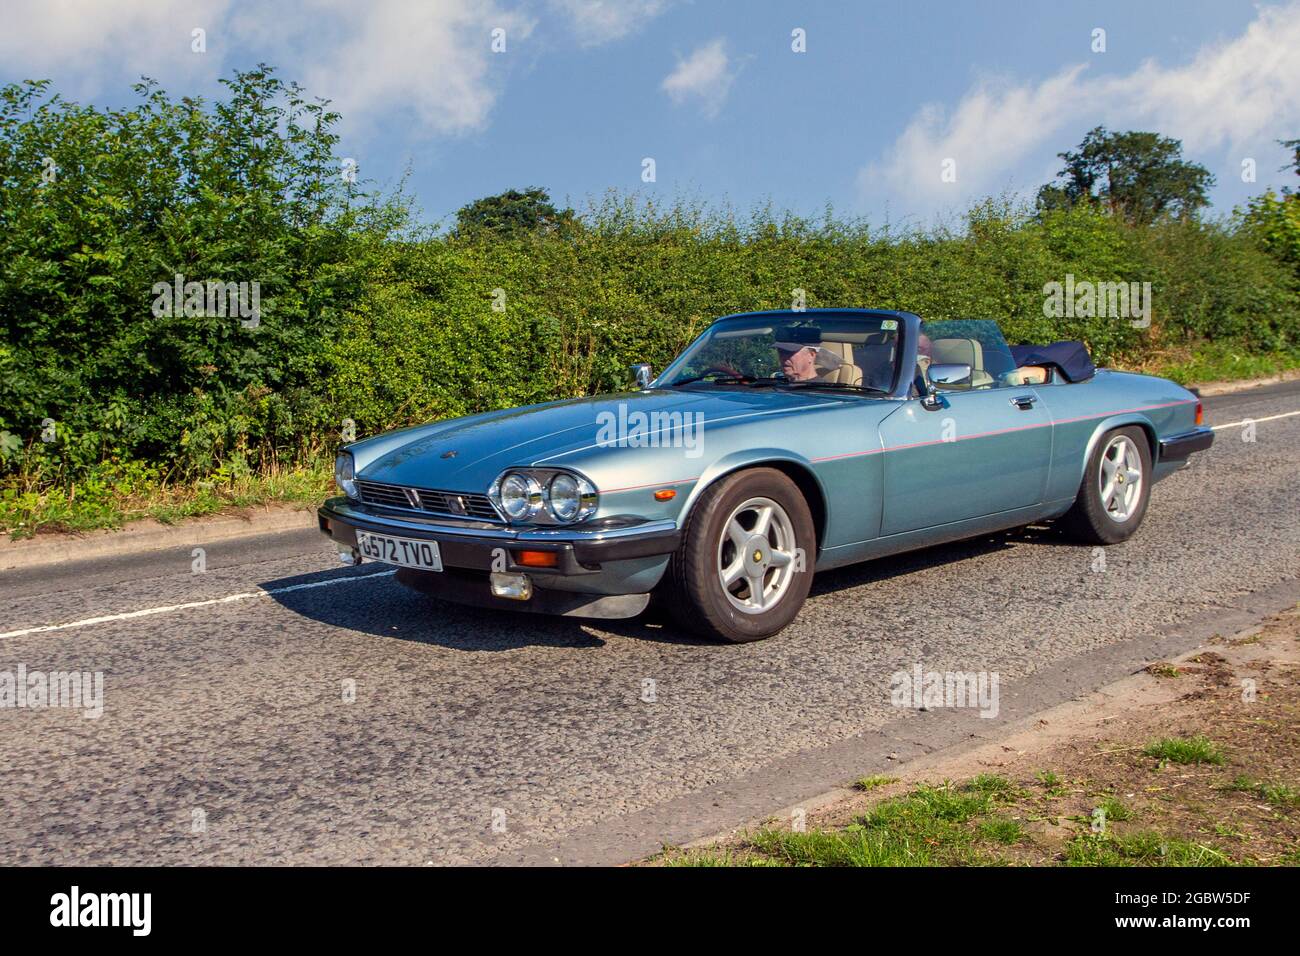 1990 90s blue Jaguar HE 3 speed automatic 5343cc petrol 2dr cabrio en-route to Capesthorne Hall classic July car show, Cheshire, UK Stock Photo